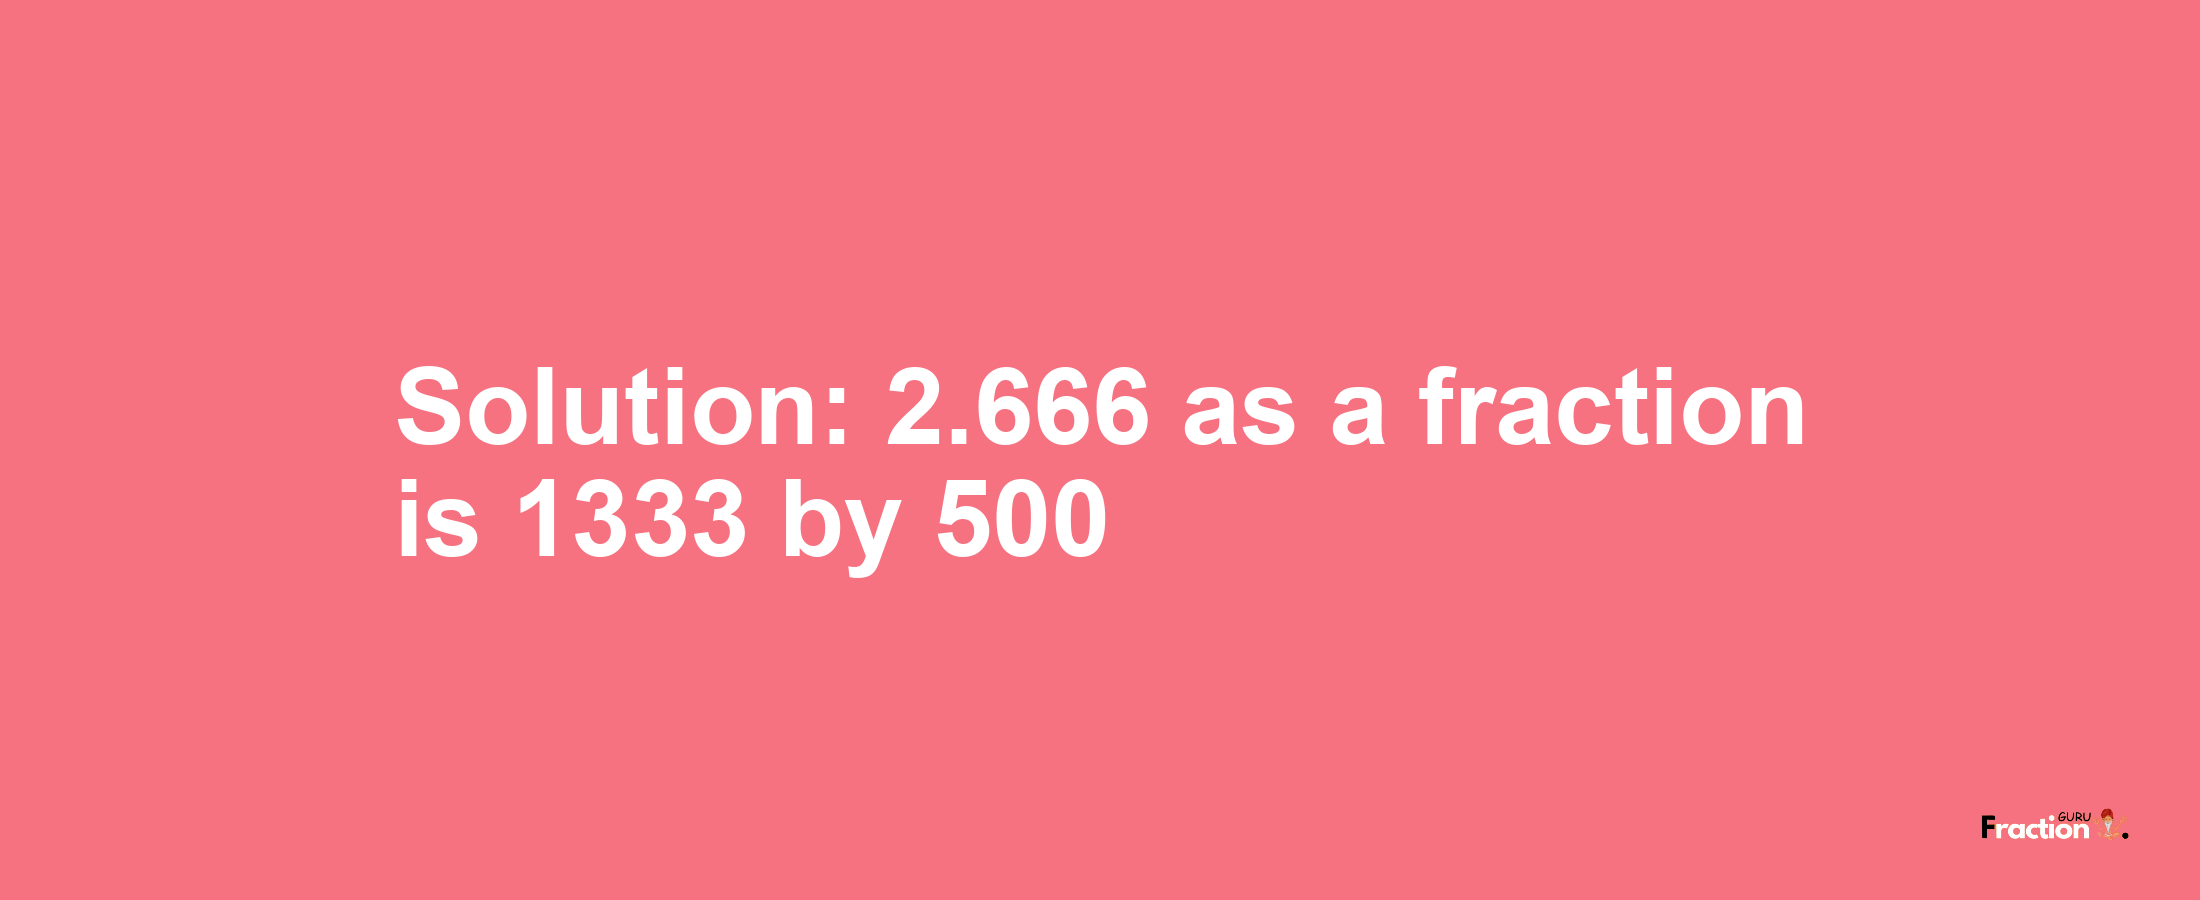 Solution:2.666 as a fraction is 1333/500